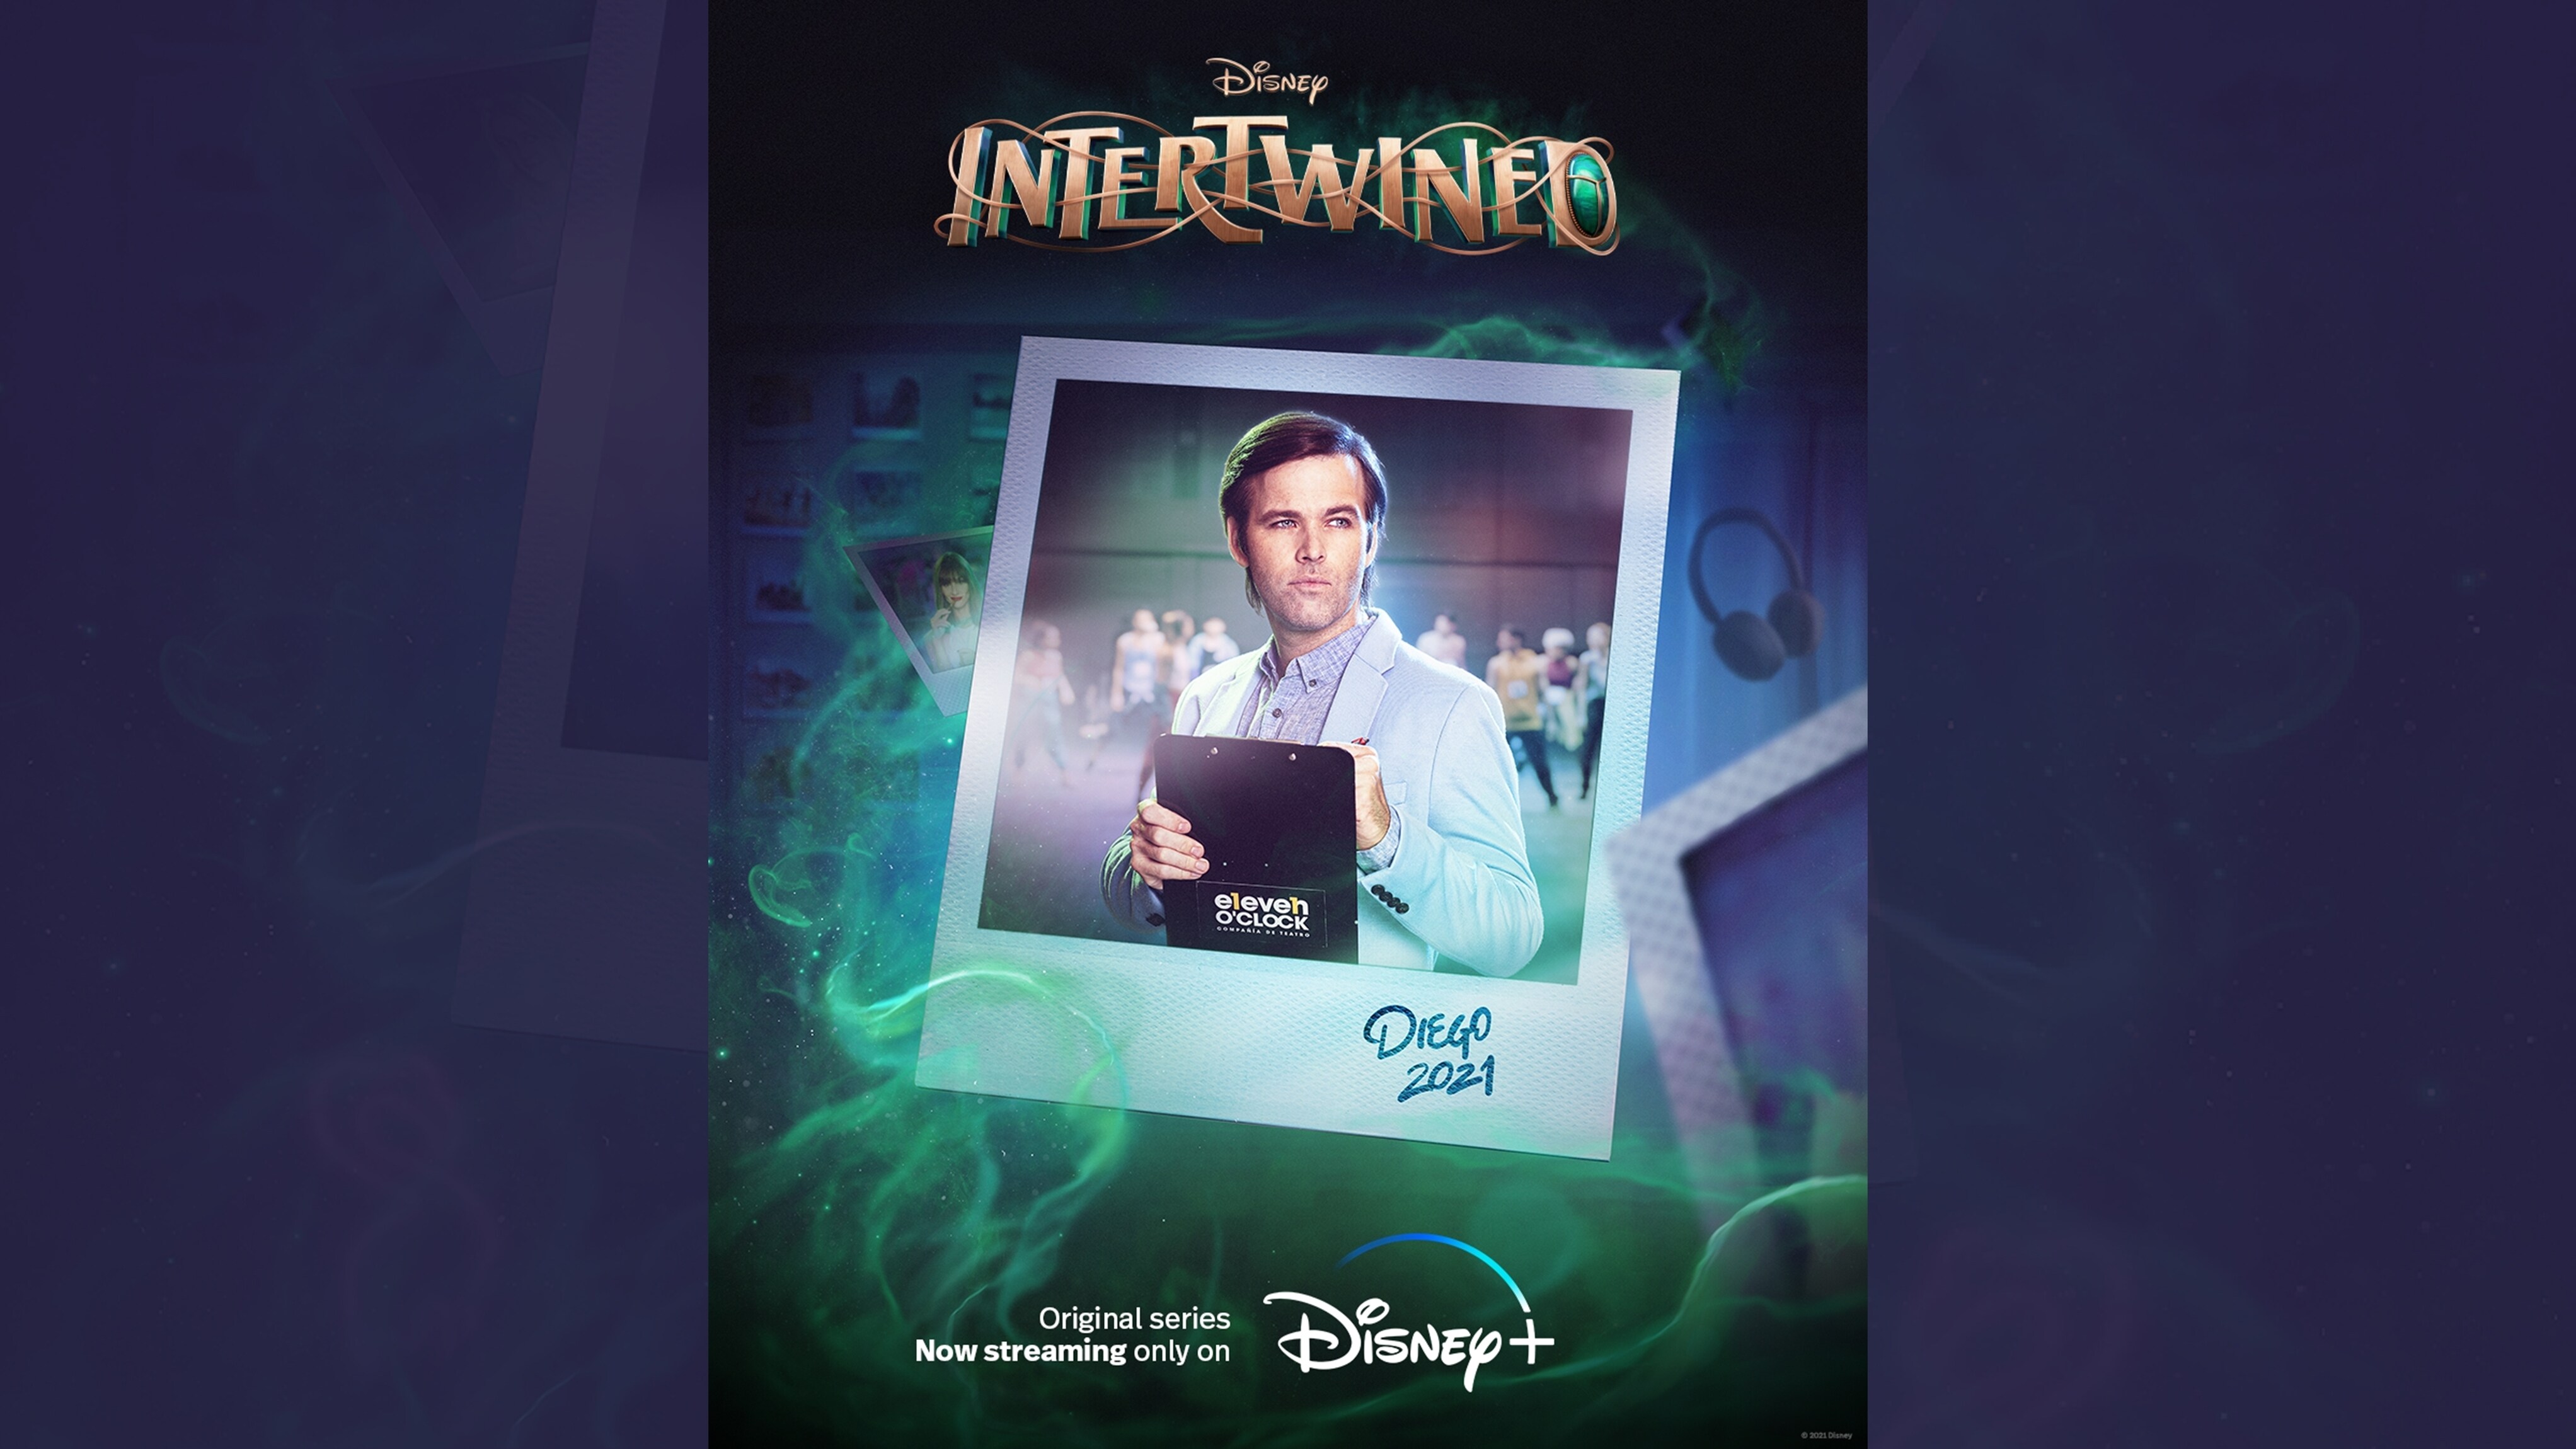 Disney | Intertwined | Diego (2021) | Original series now streaming only on Disney+